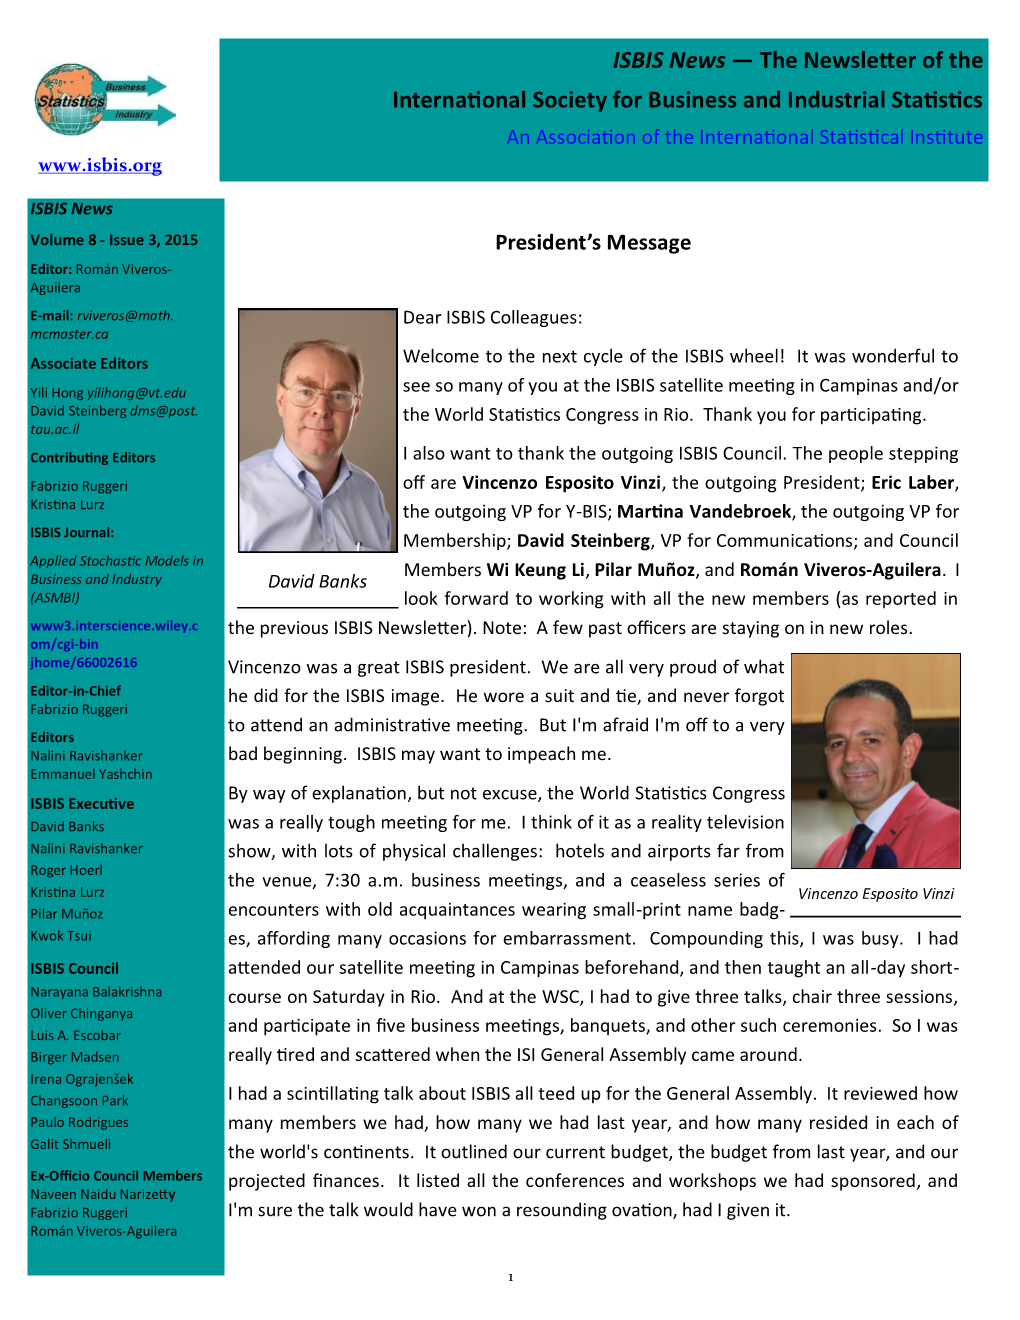 ISBIS News — the Newsletter of the International Society for Business and Industrial Statistics